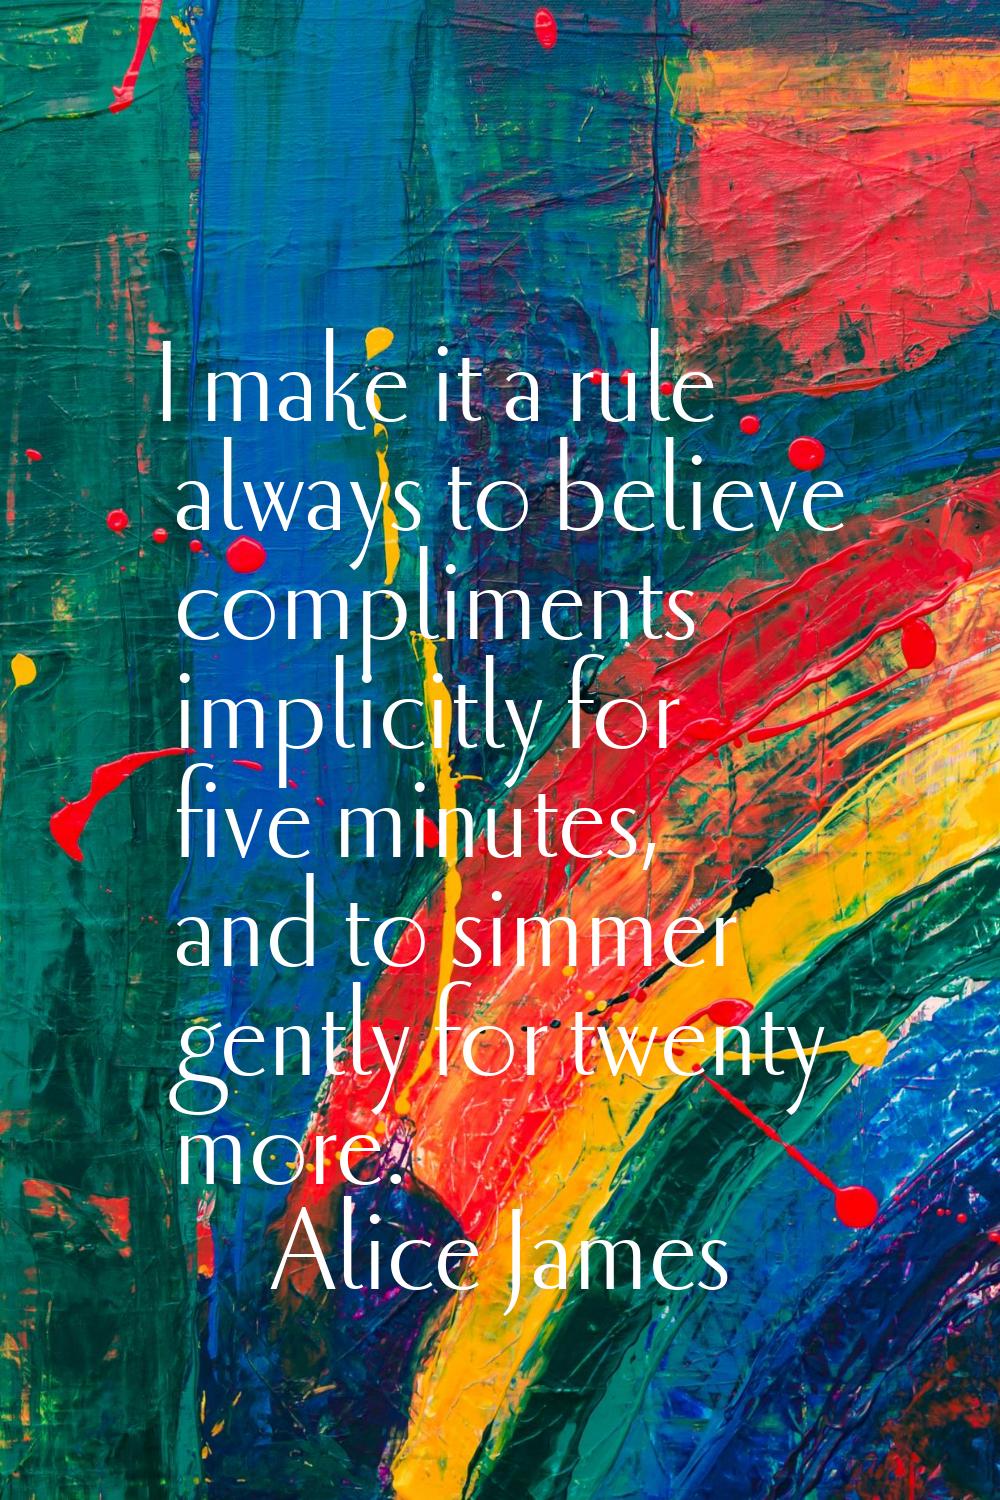 I make it a rule always to believe compliments implicitly for five minutes, and to simmer gently fo